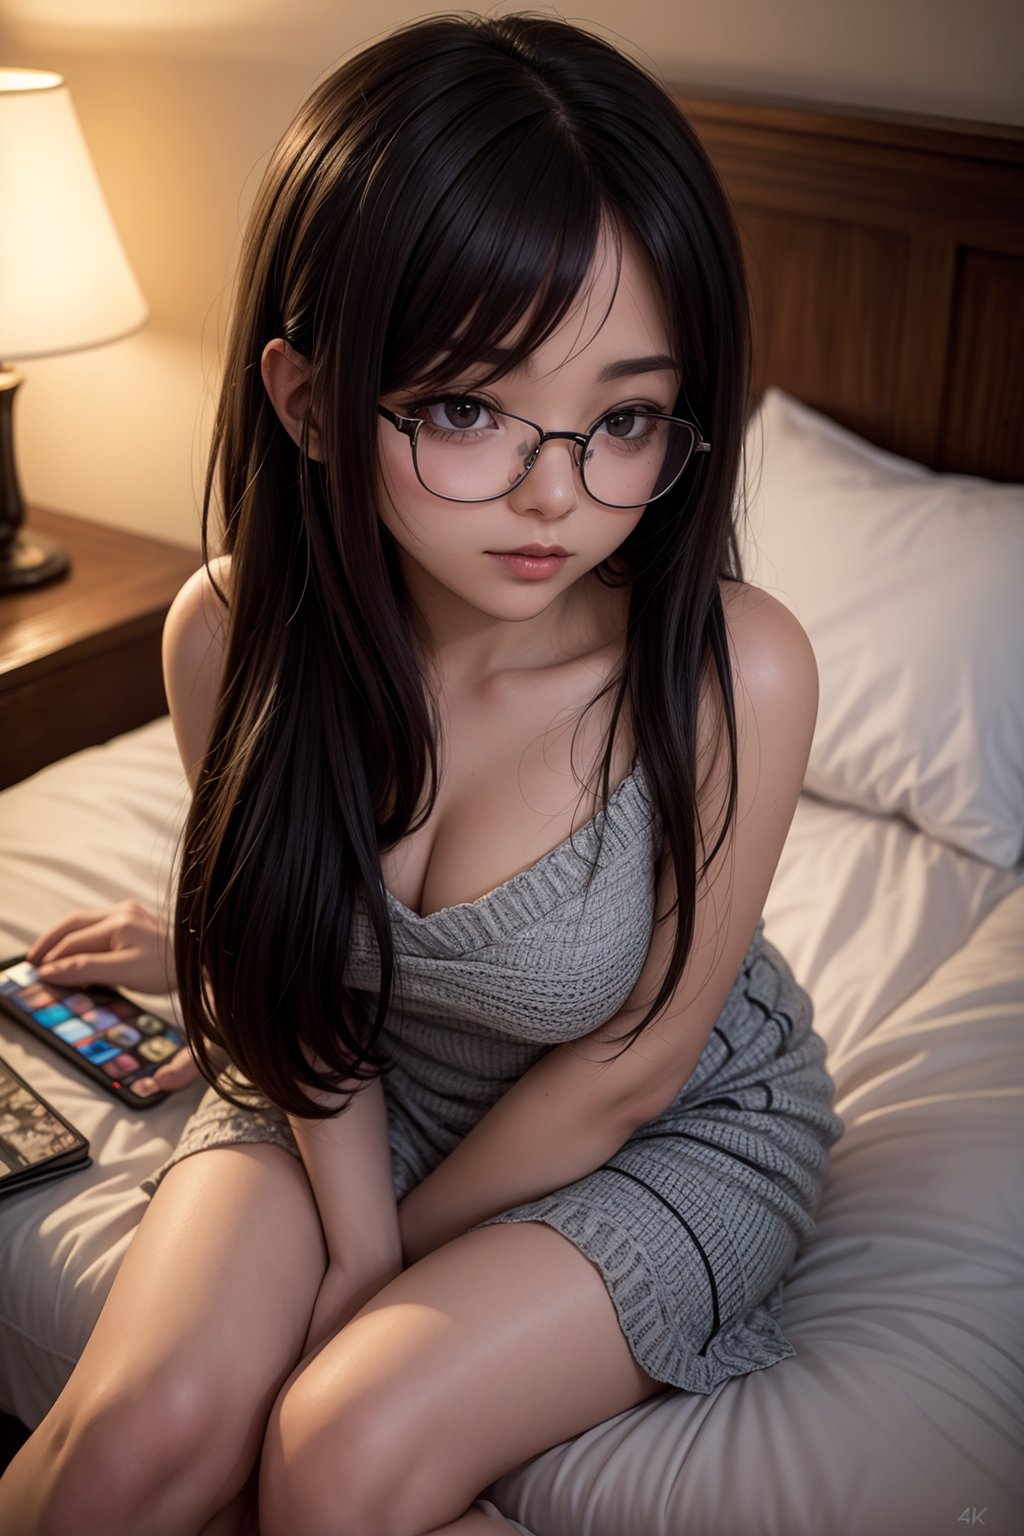 In a dimly lit bedroom, a stunning portrait of a kawaii beauty with dark bobbed hair and glasses dominates the frame. She sits comfortably on a plush bed, sweat glistening on her skin as she gazes directly at the viewer. The ultra-high resolution 8K camera captures every detail, from the subtle curves of her features to the intricate patterns on her clothes. This masterpiece is a testament to the artist's skill in capturing beauty and intimacy.